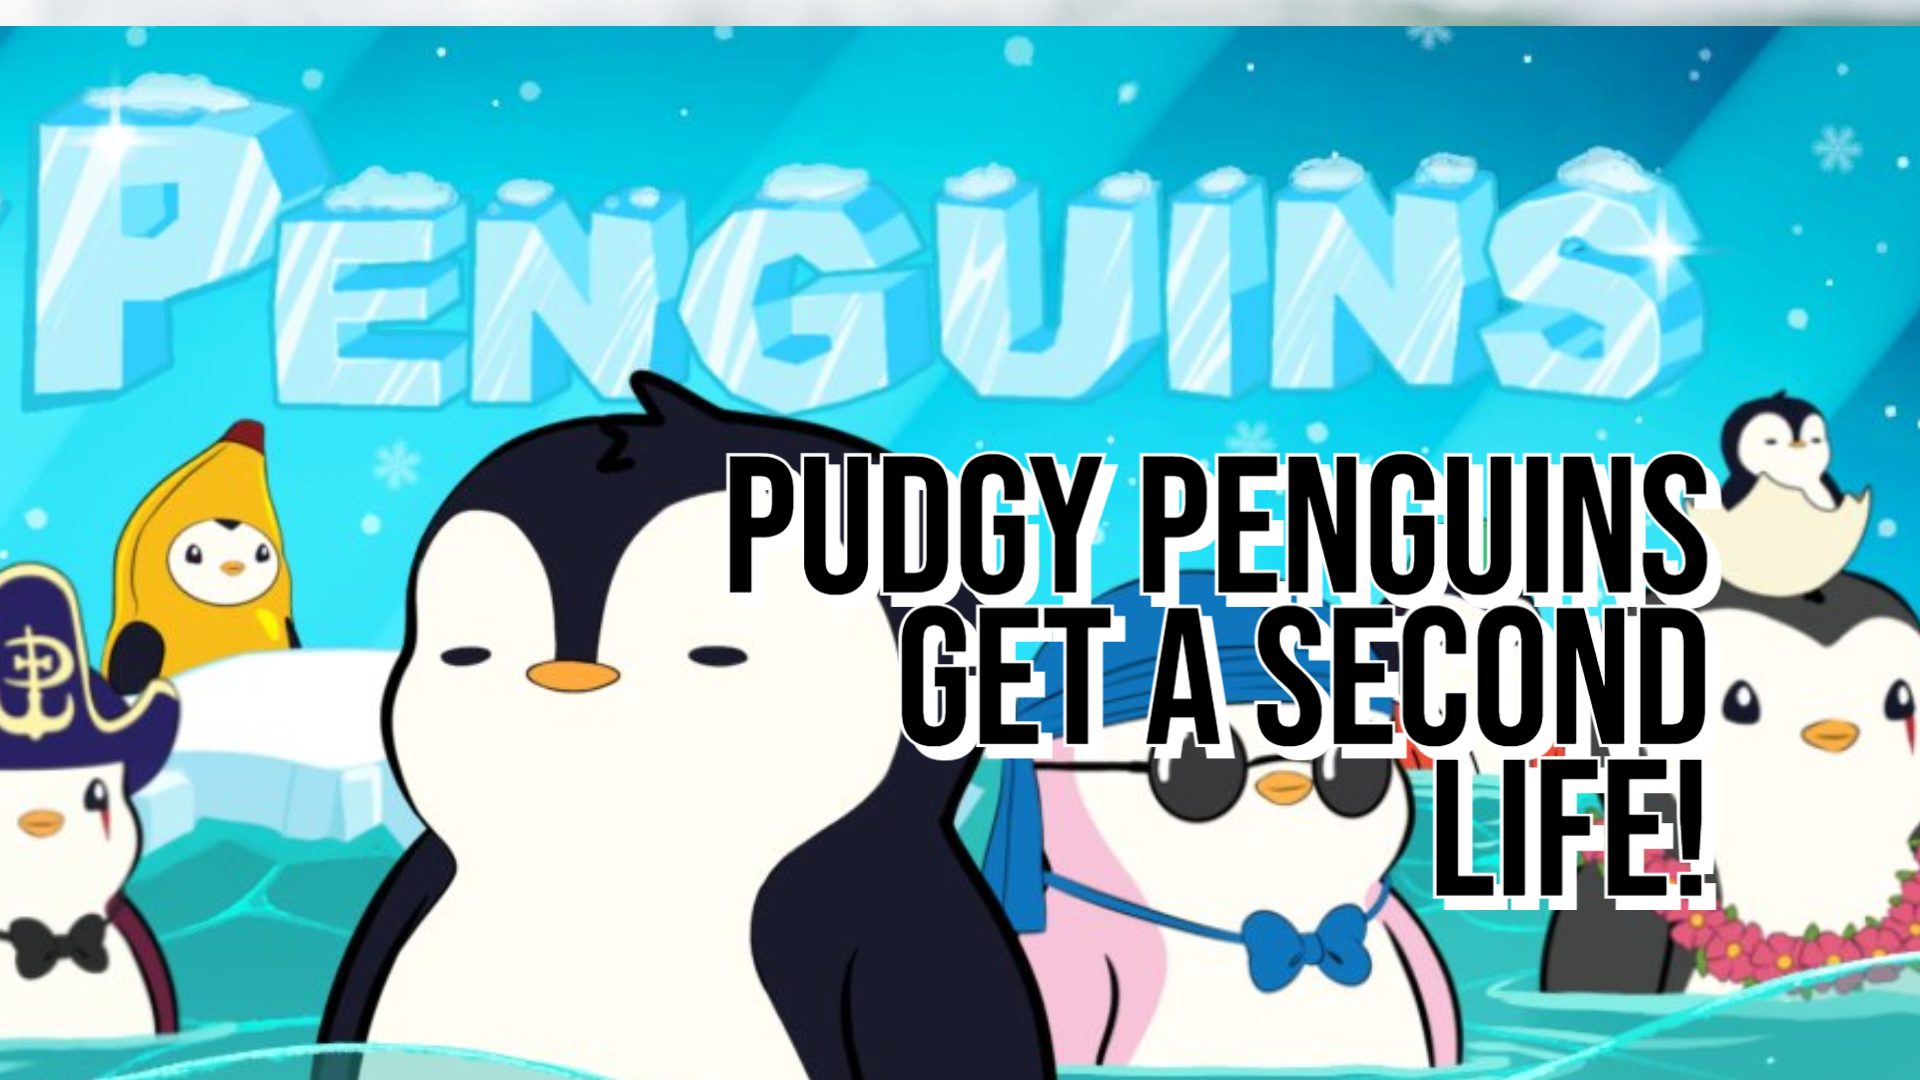 Pudgy Penguins get a second chance! New Ownership